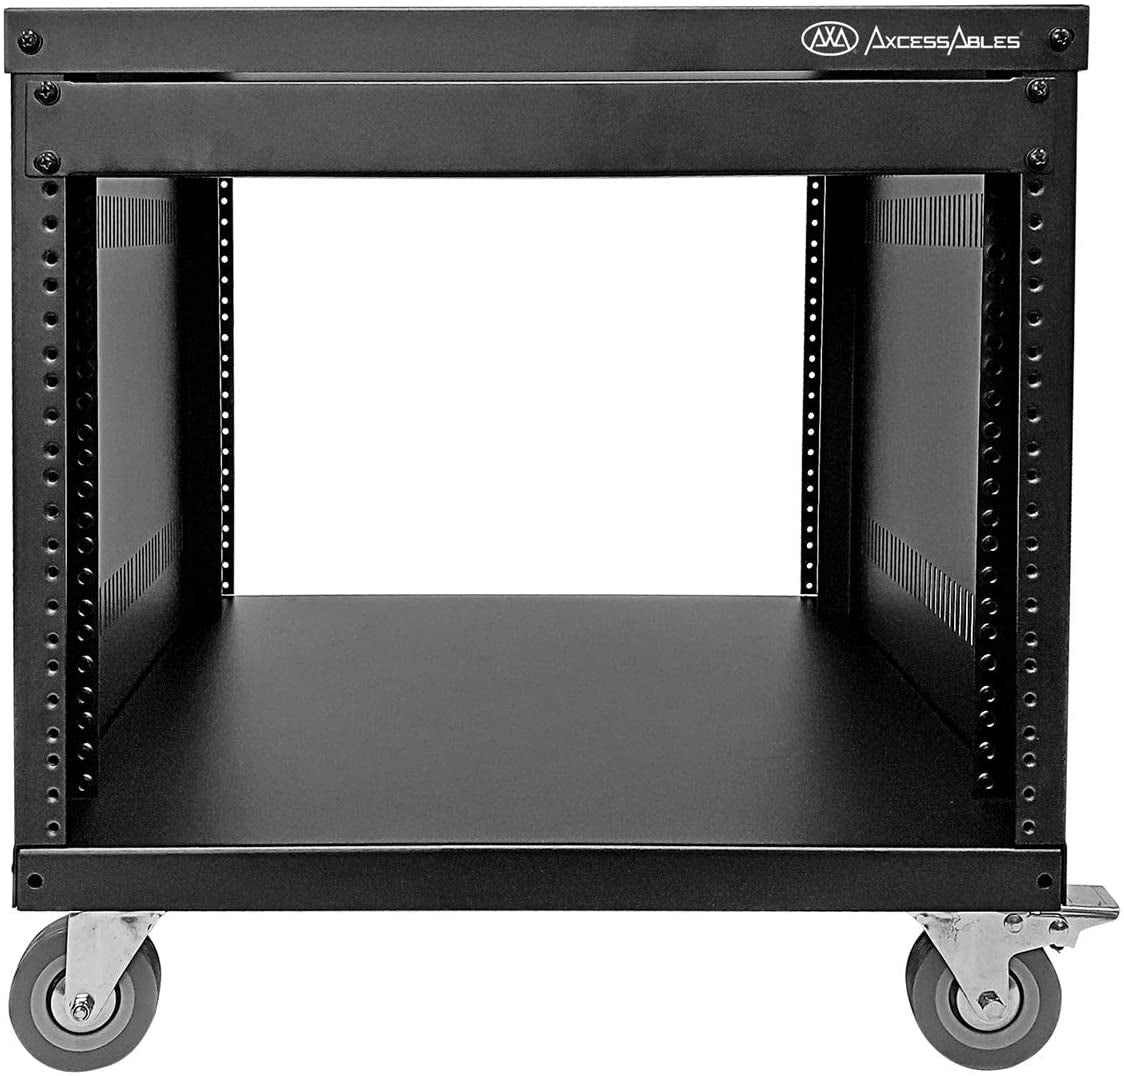 AxcessAbles RK 8U Equipment Rolling Cabinet Rack Stand with Locking Caster Wheels (Compatible with American 5mm & European 6mm Racks) Audio Video, Recording Studio, Music, Live Sound, Church Storage - Open Box